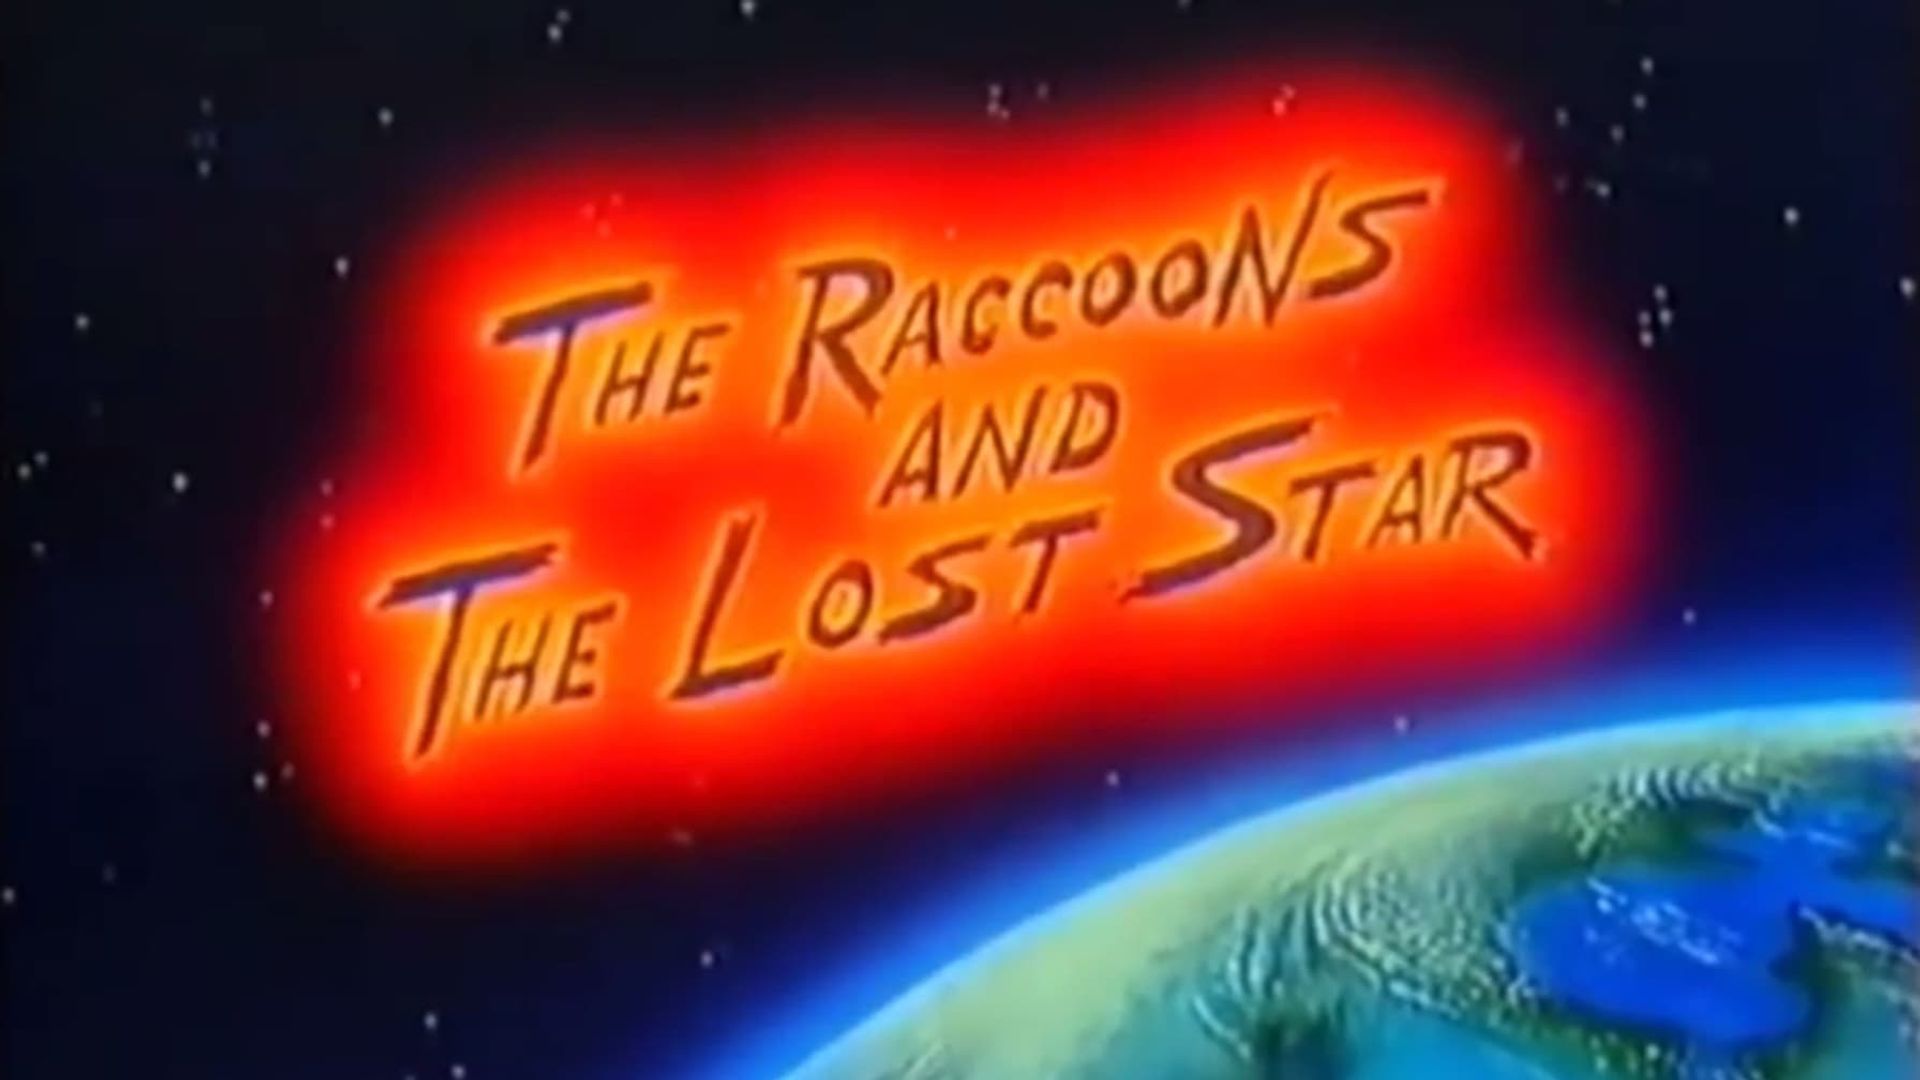 The Raccoons and the Lost Star background